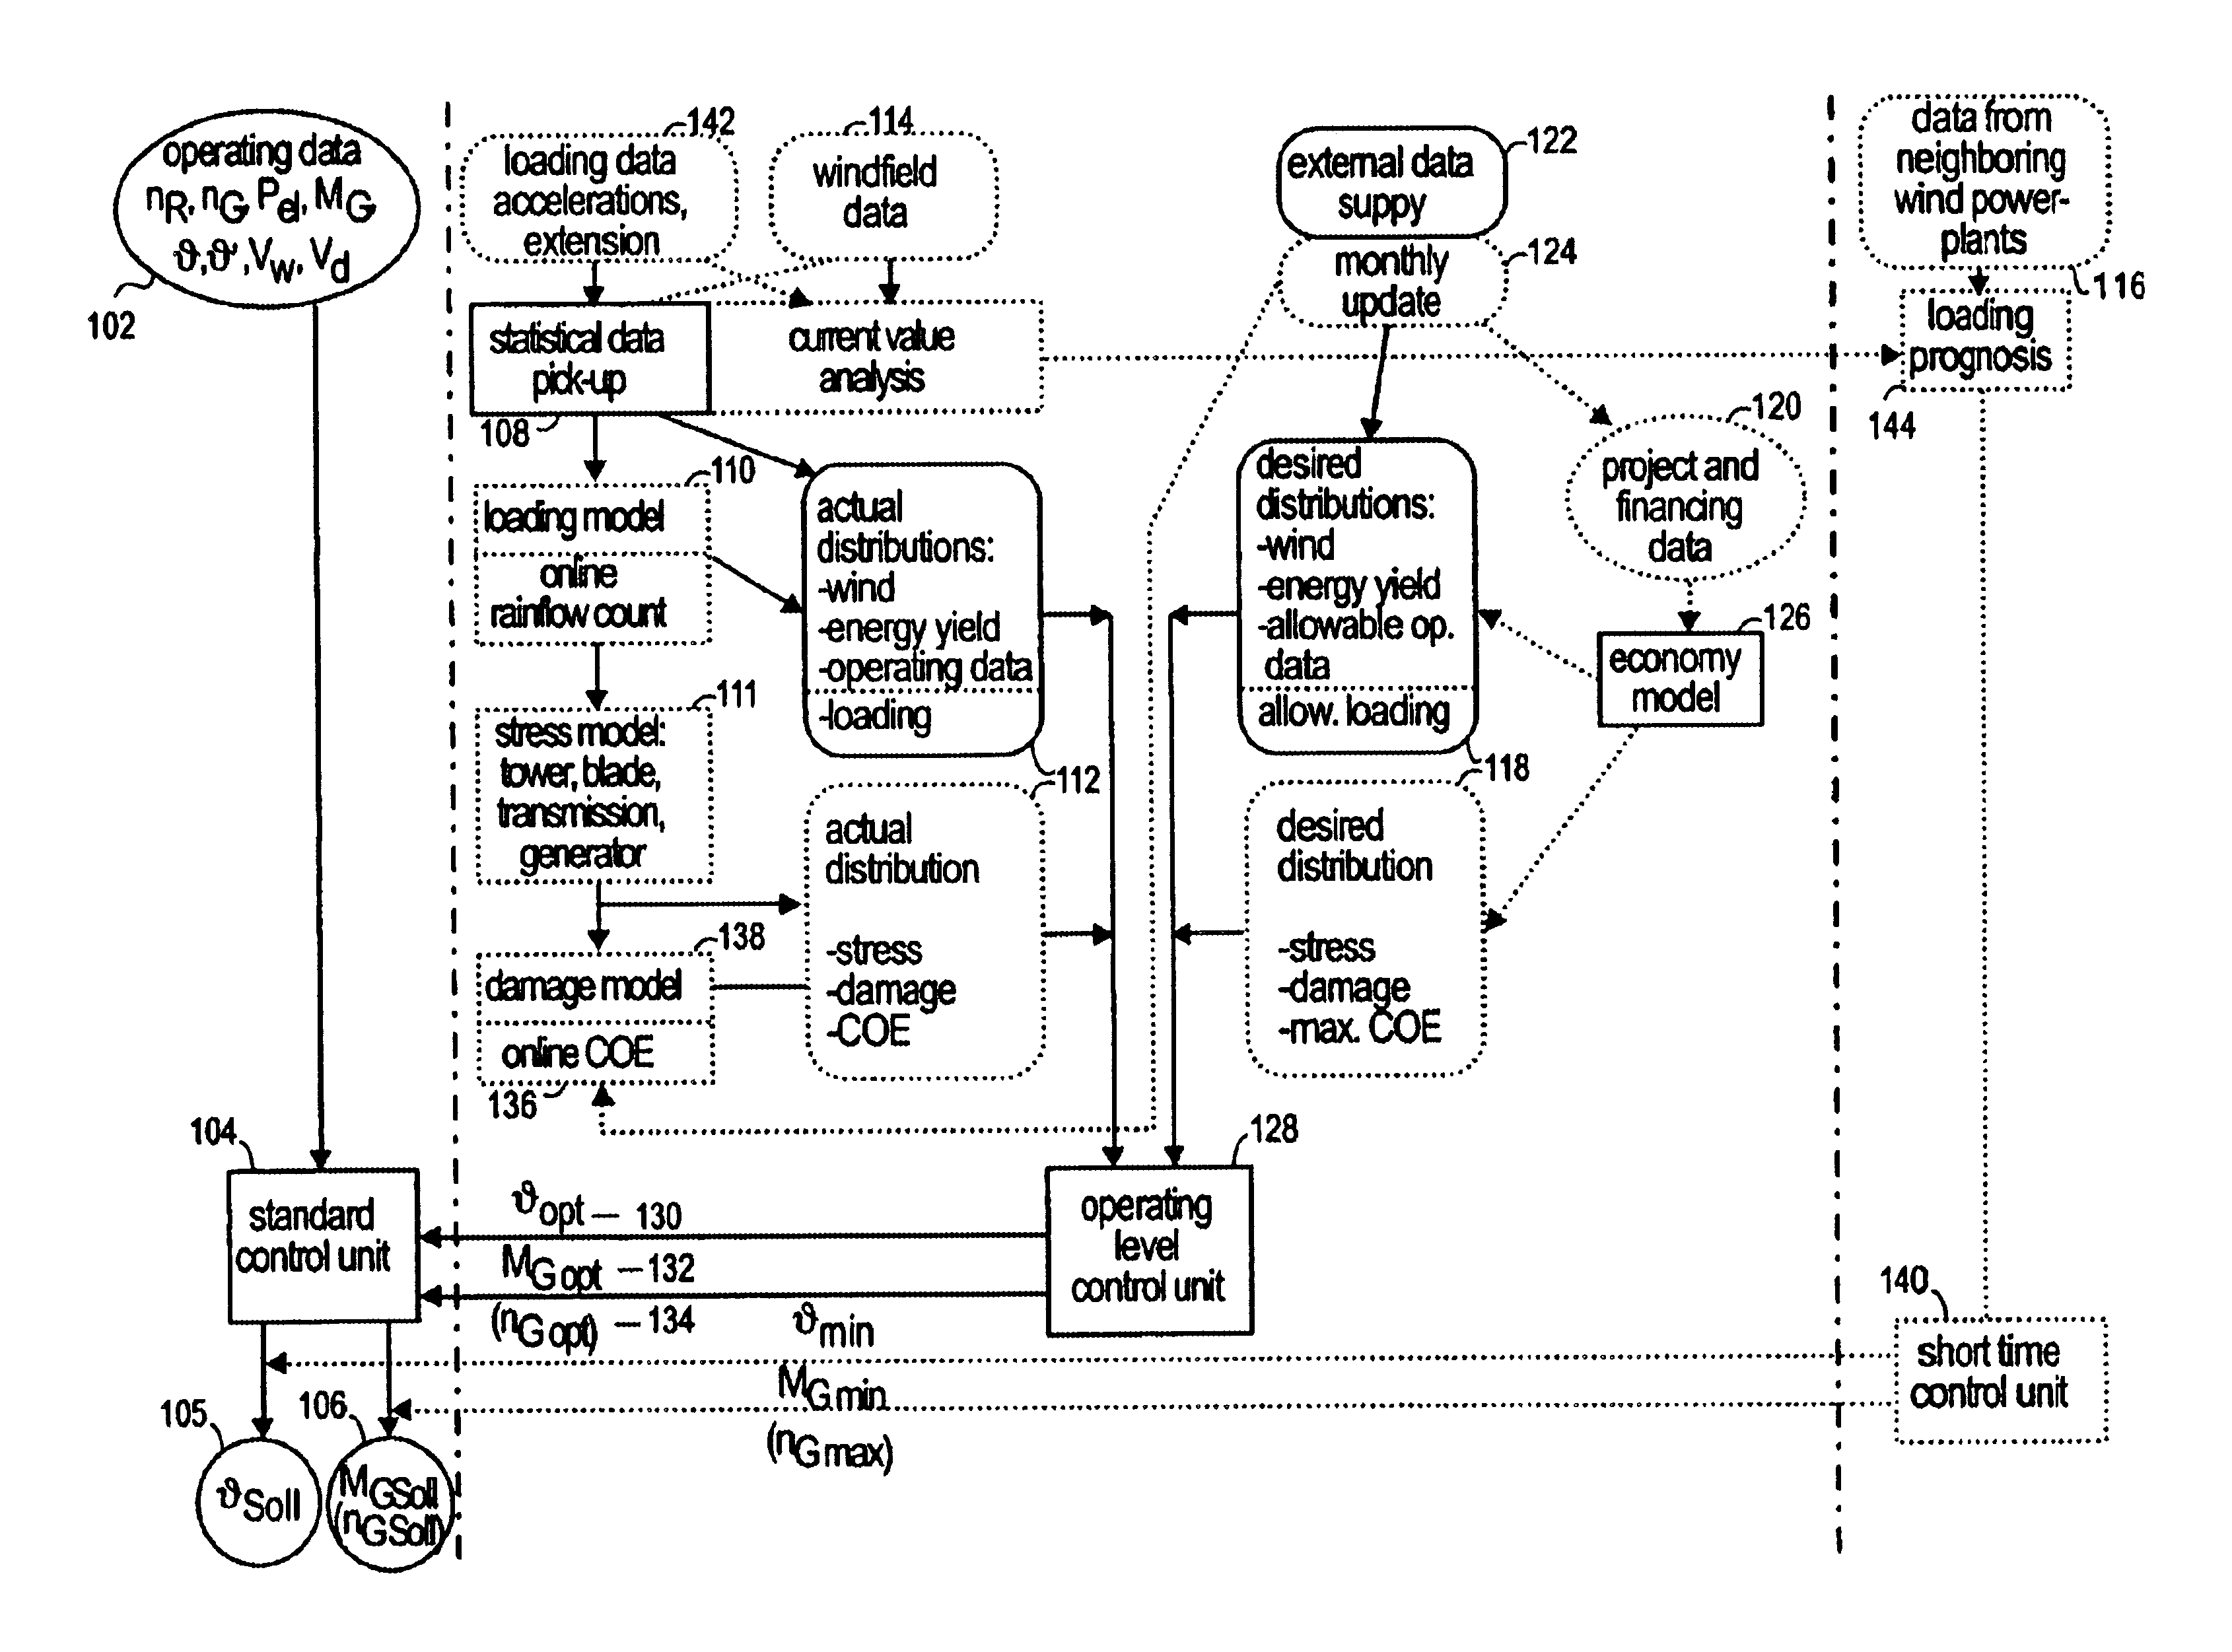 Control system for a wind power plant